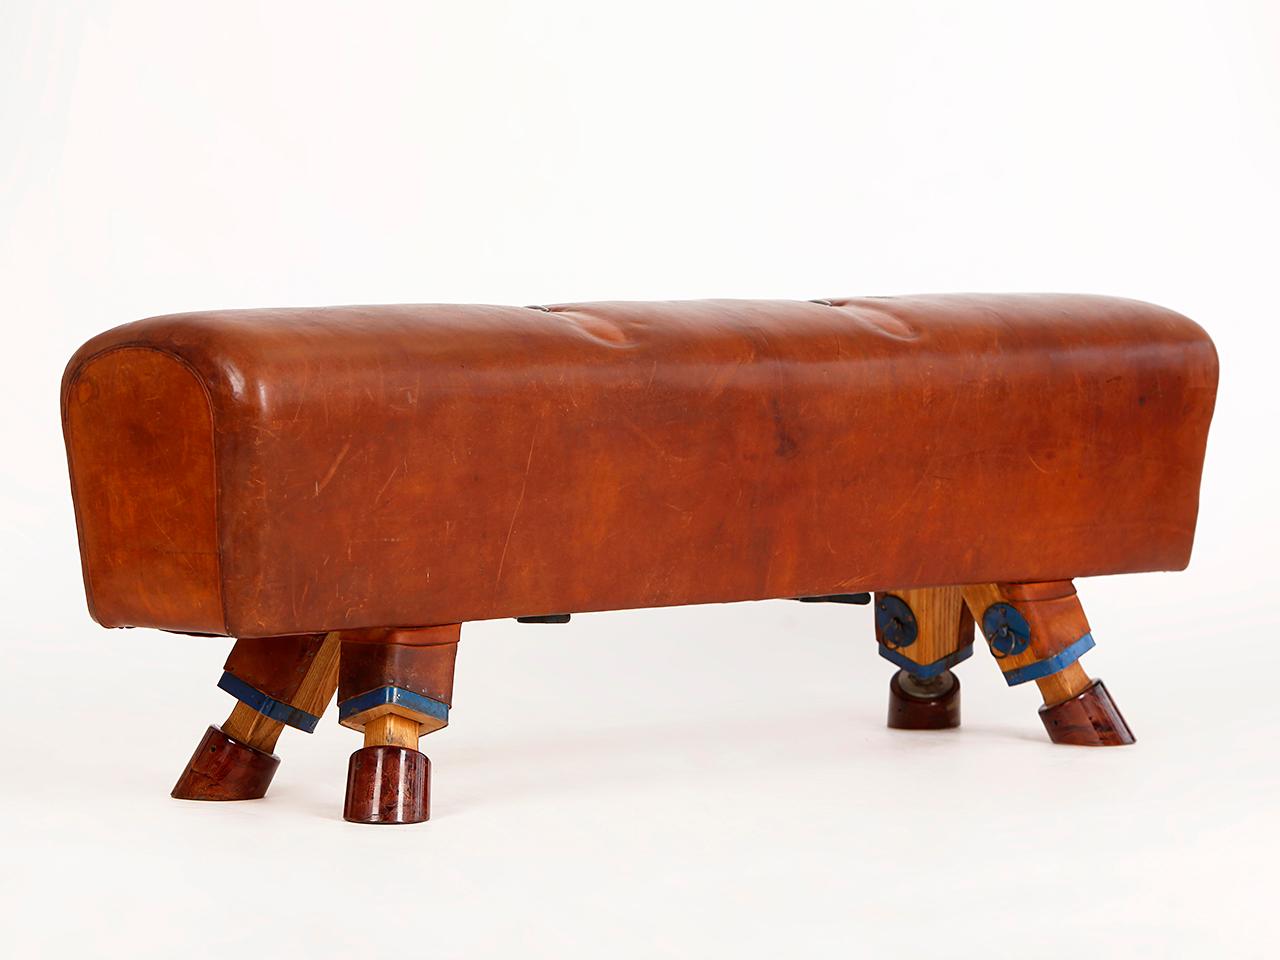 Pommel horse from former Czechoslovakia. The legs were cut to a height of 54cm.
The thick leather has been cleaned and the patina was retained. Very good vintage condition.